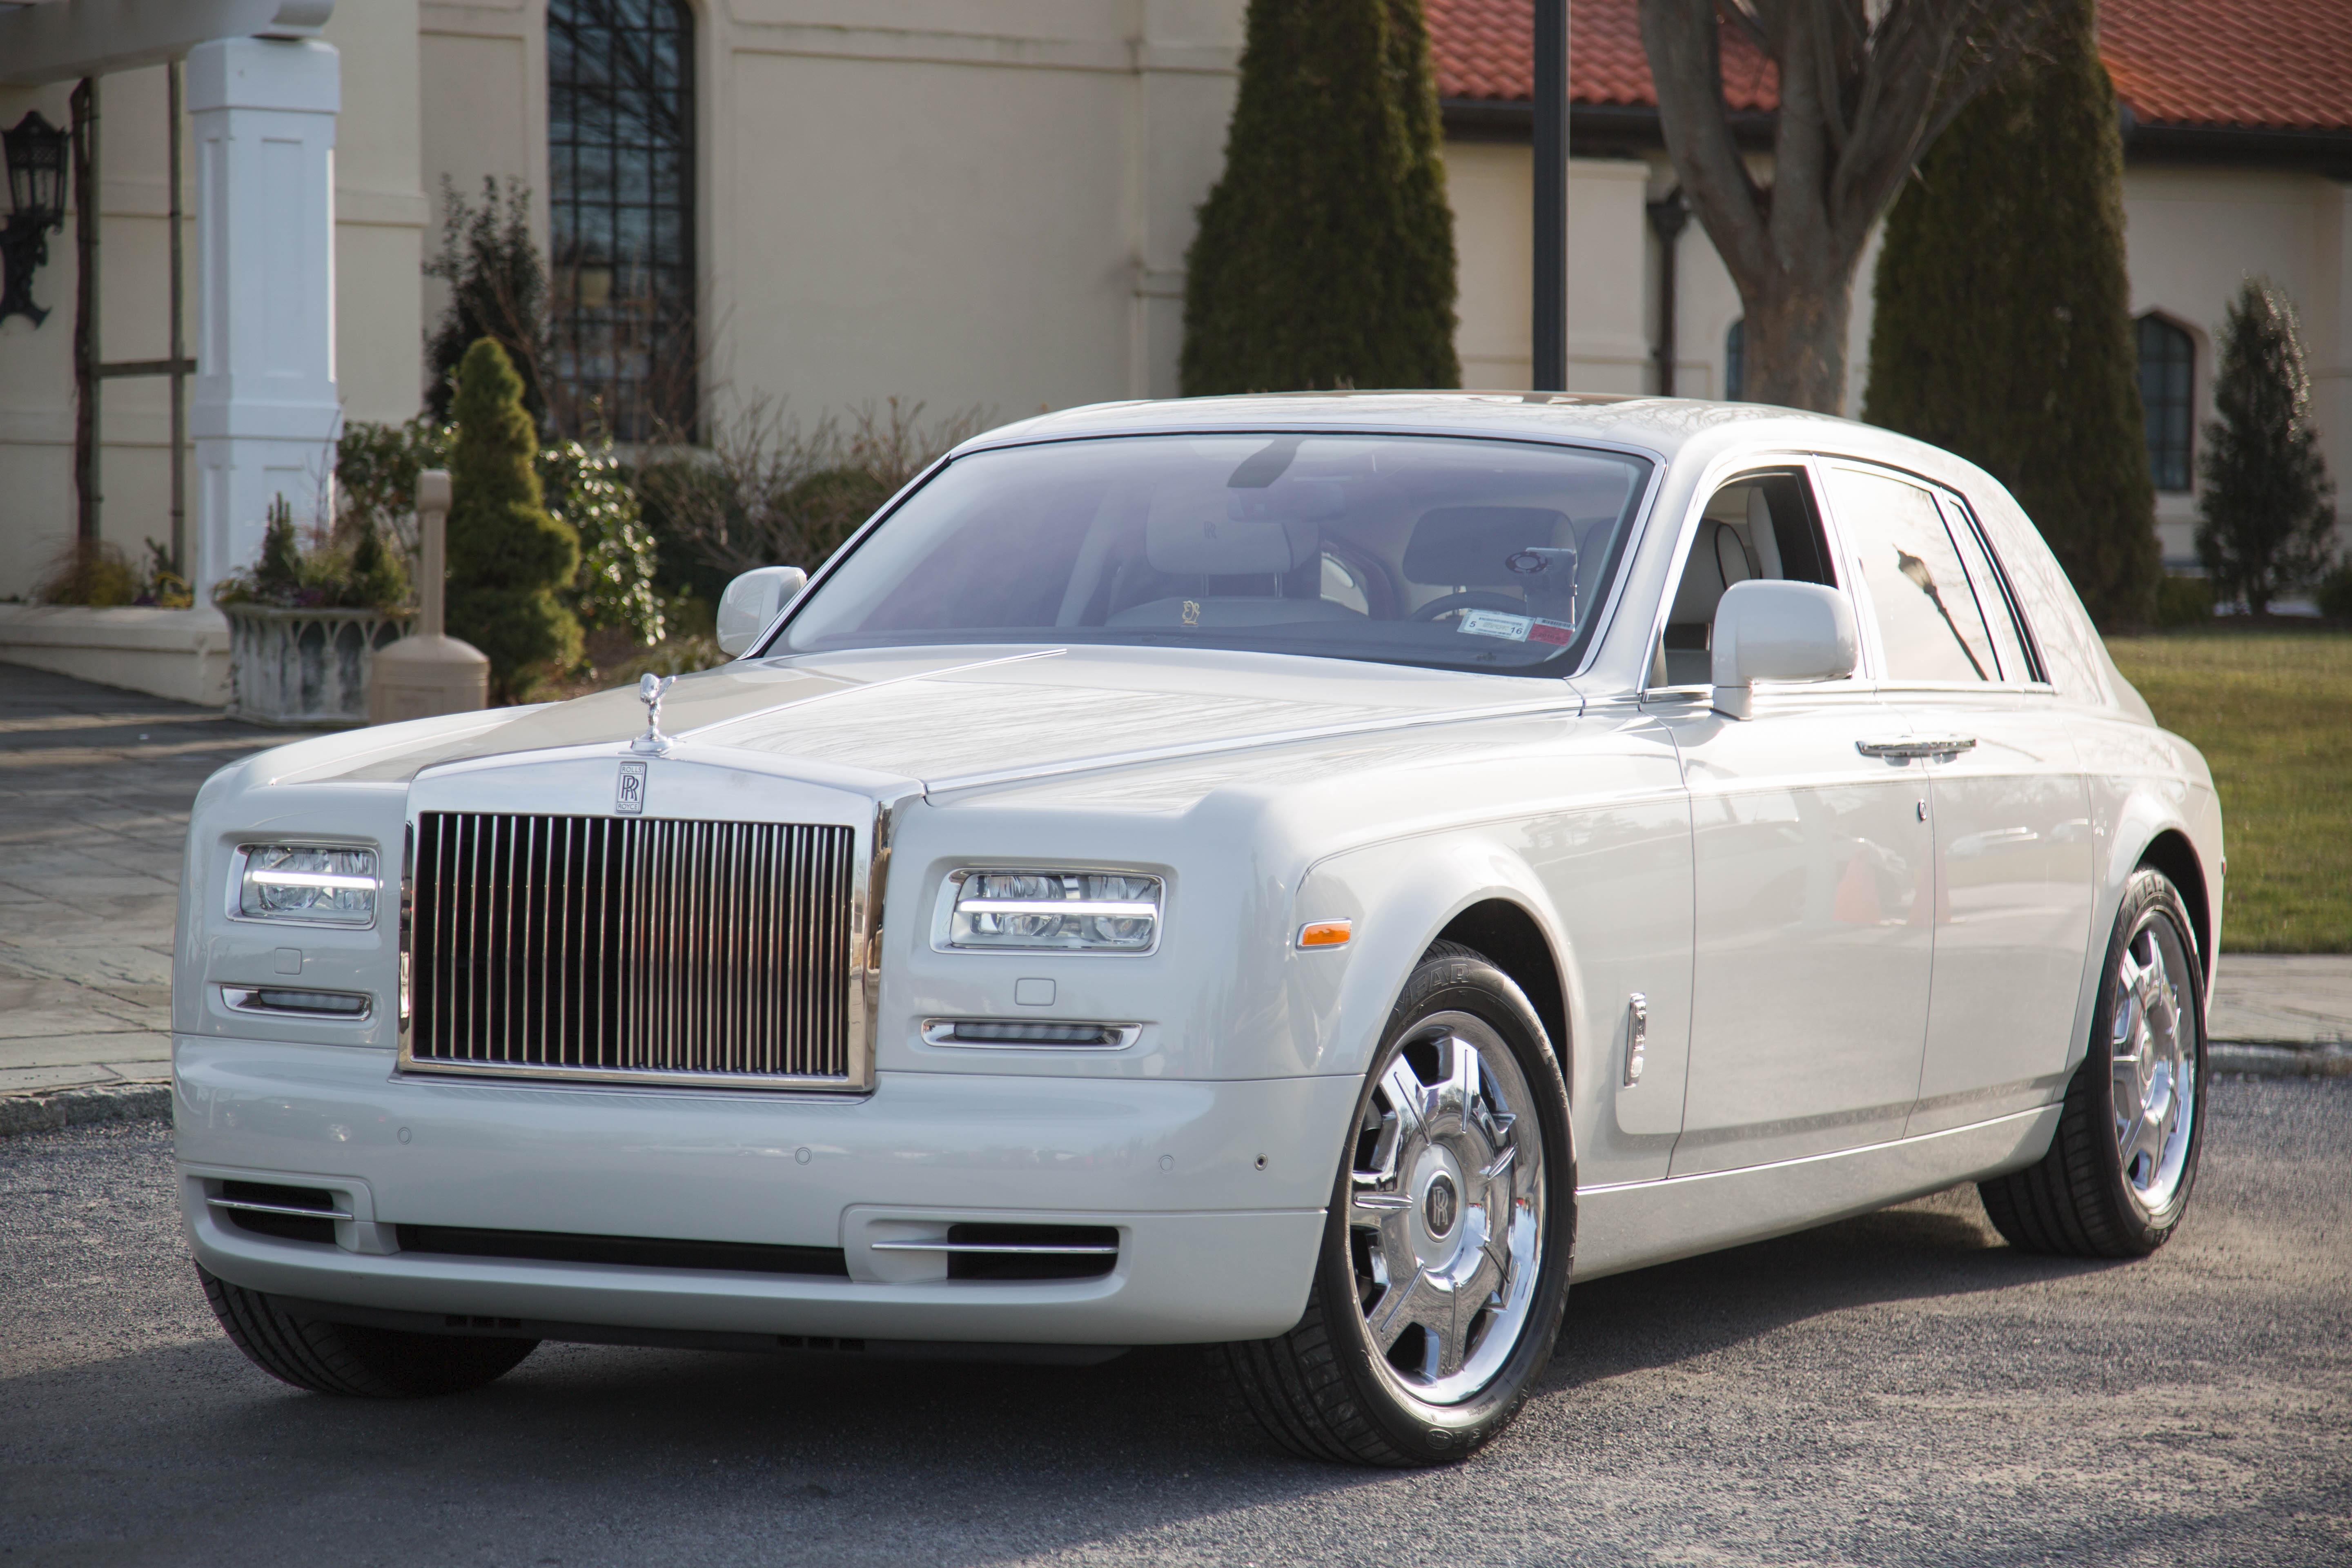 North Fork Long Island Wine Tours private Tour Rolls Royce Phantom for 2 people